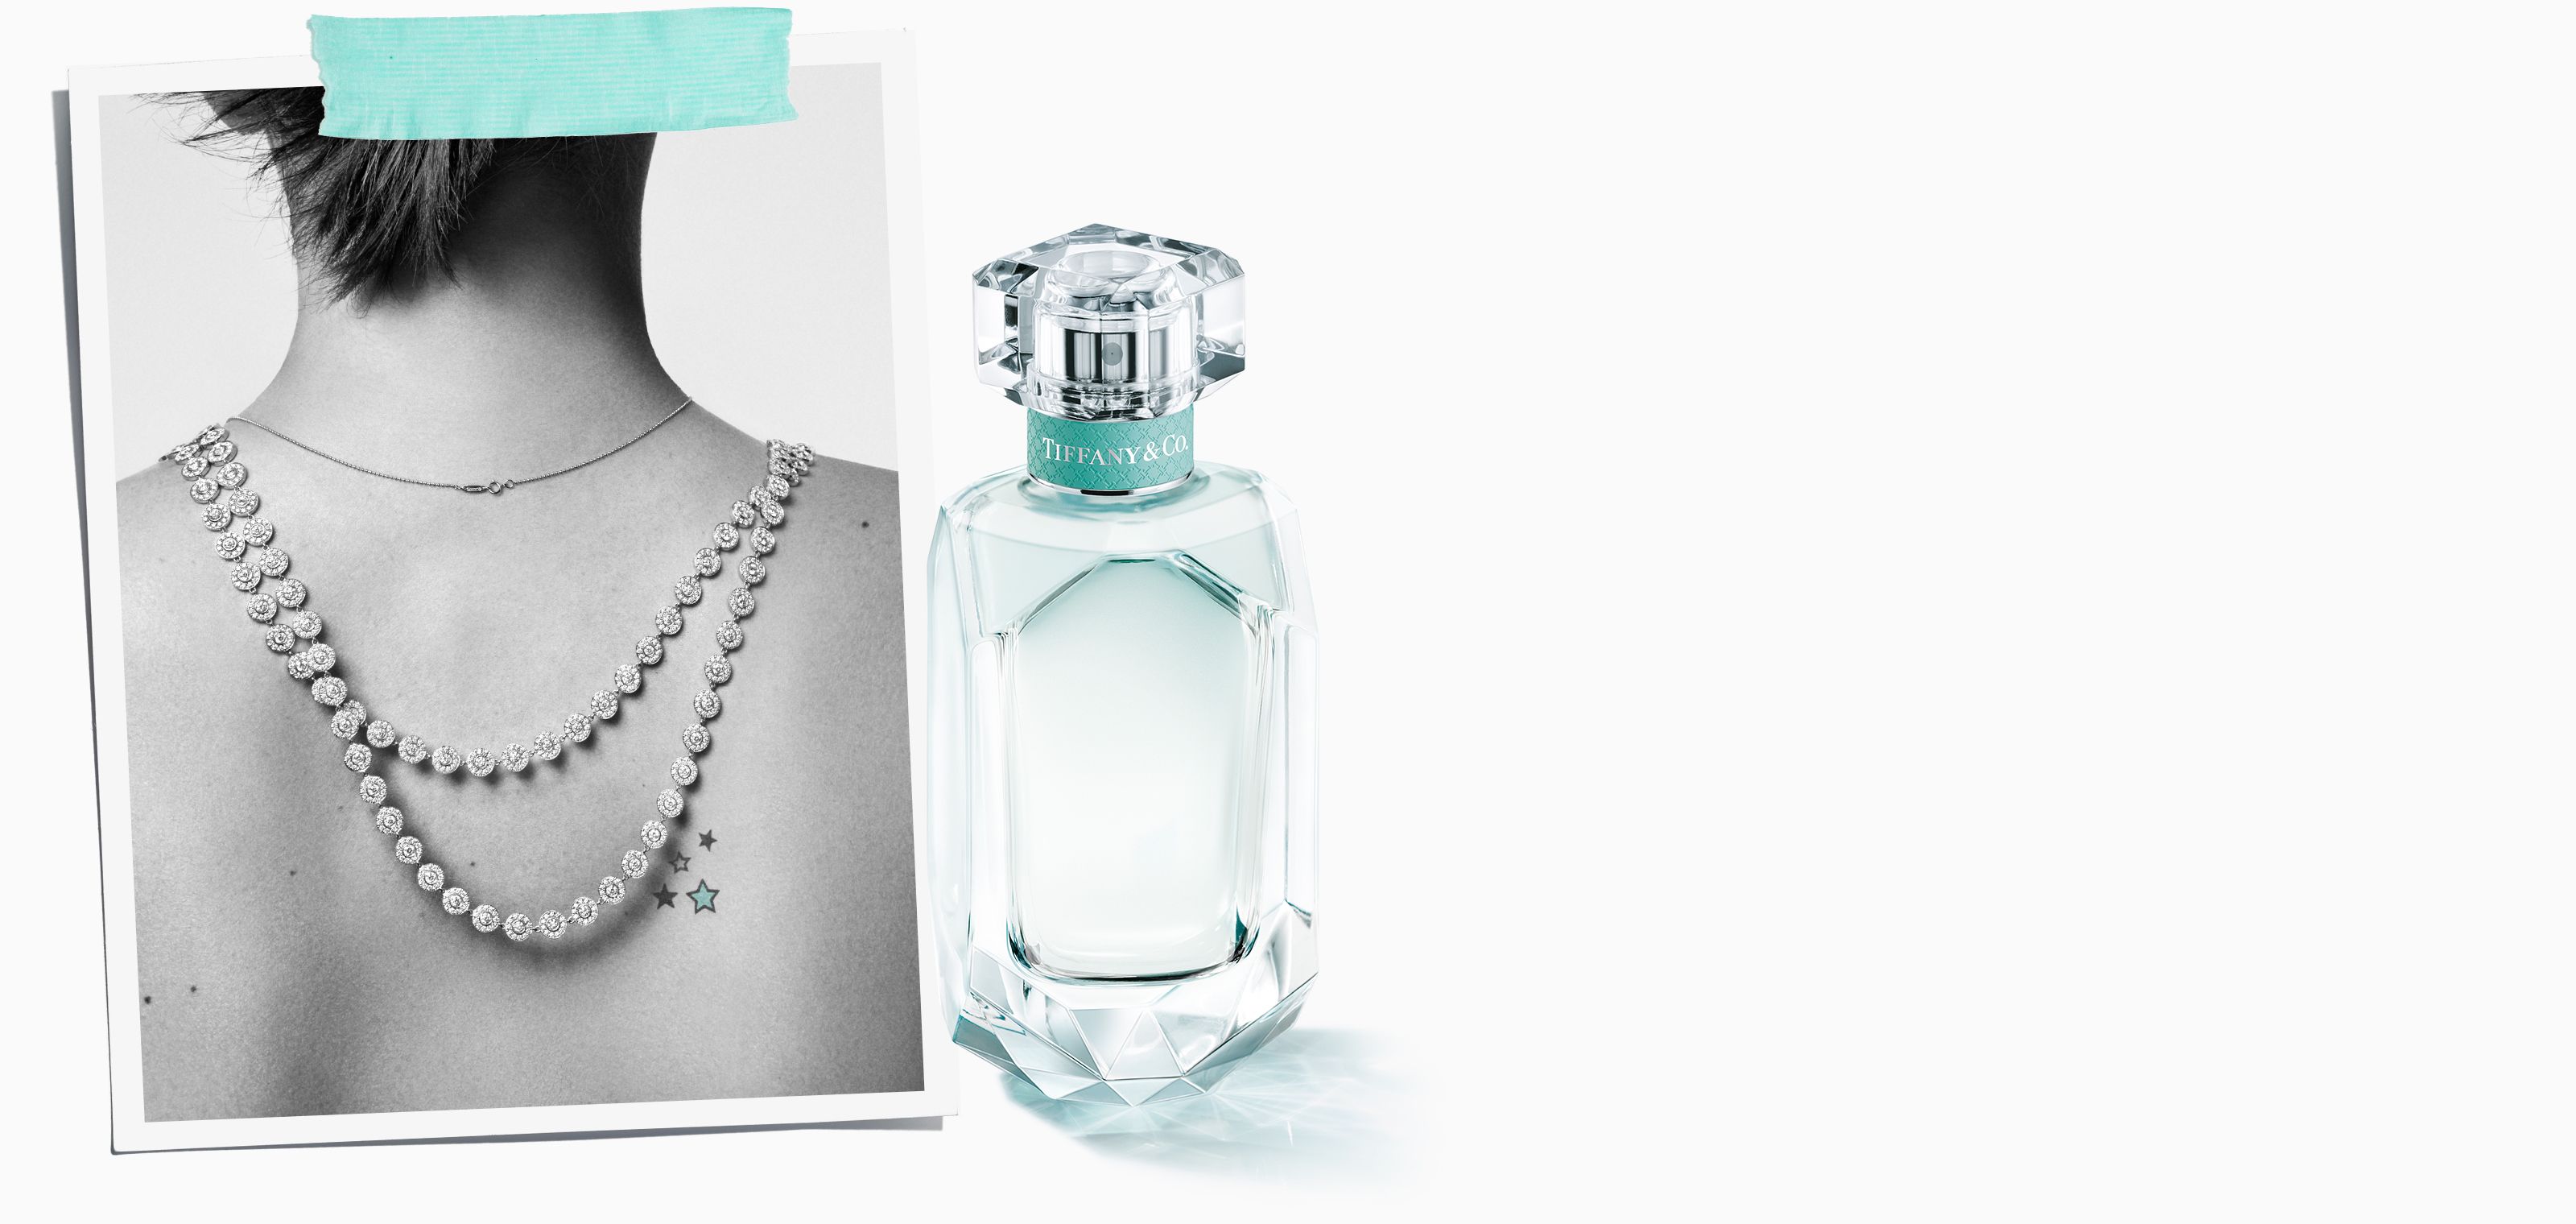 Tiffany & Co. EDP – The Fragrance Decant Boutique™